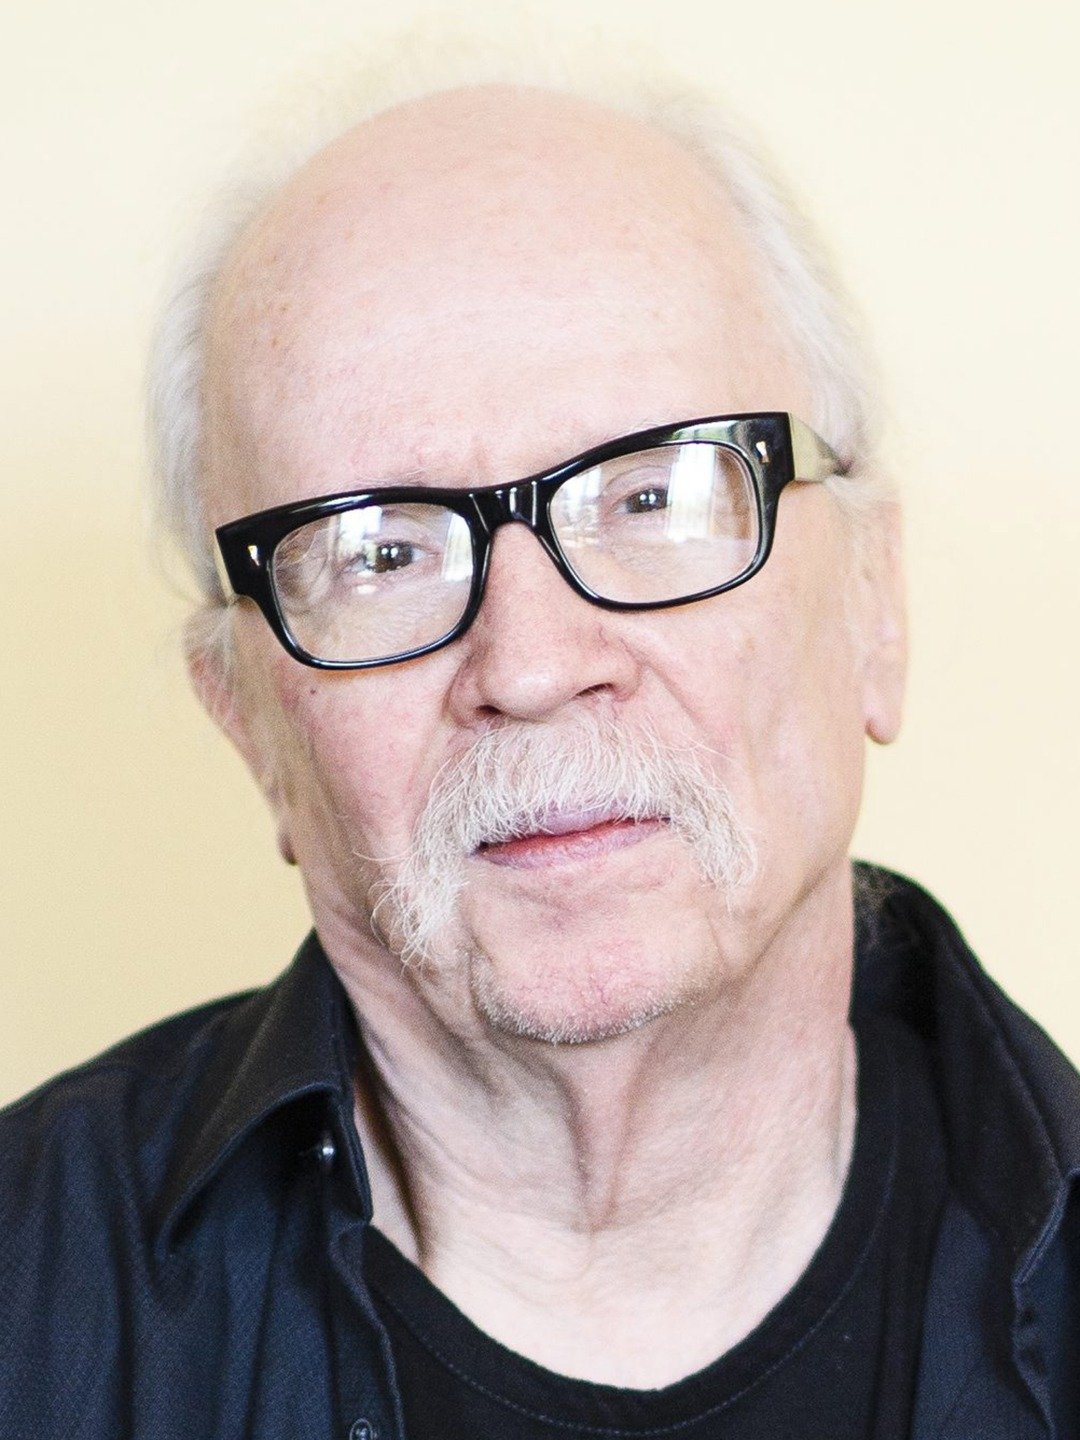 All John Carpenter Movies Ranked by Tomatometer